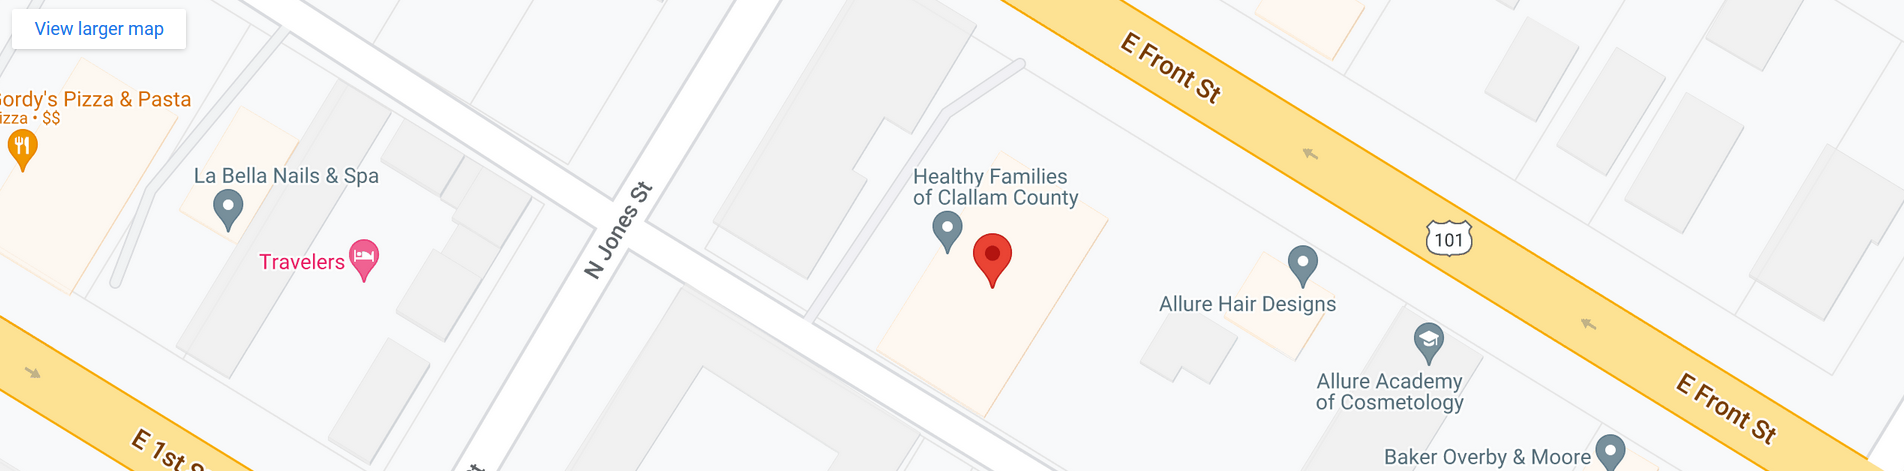 Link to Healthy Families of Clallam County's location on Google Maps